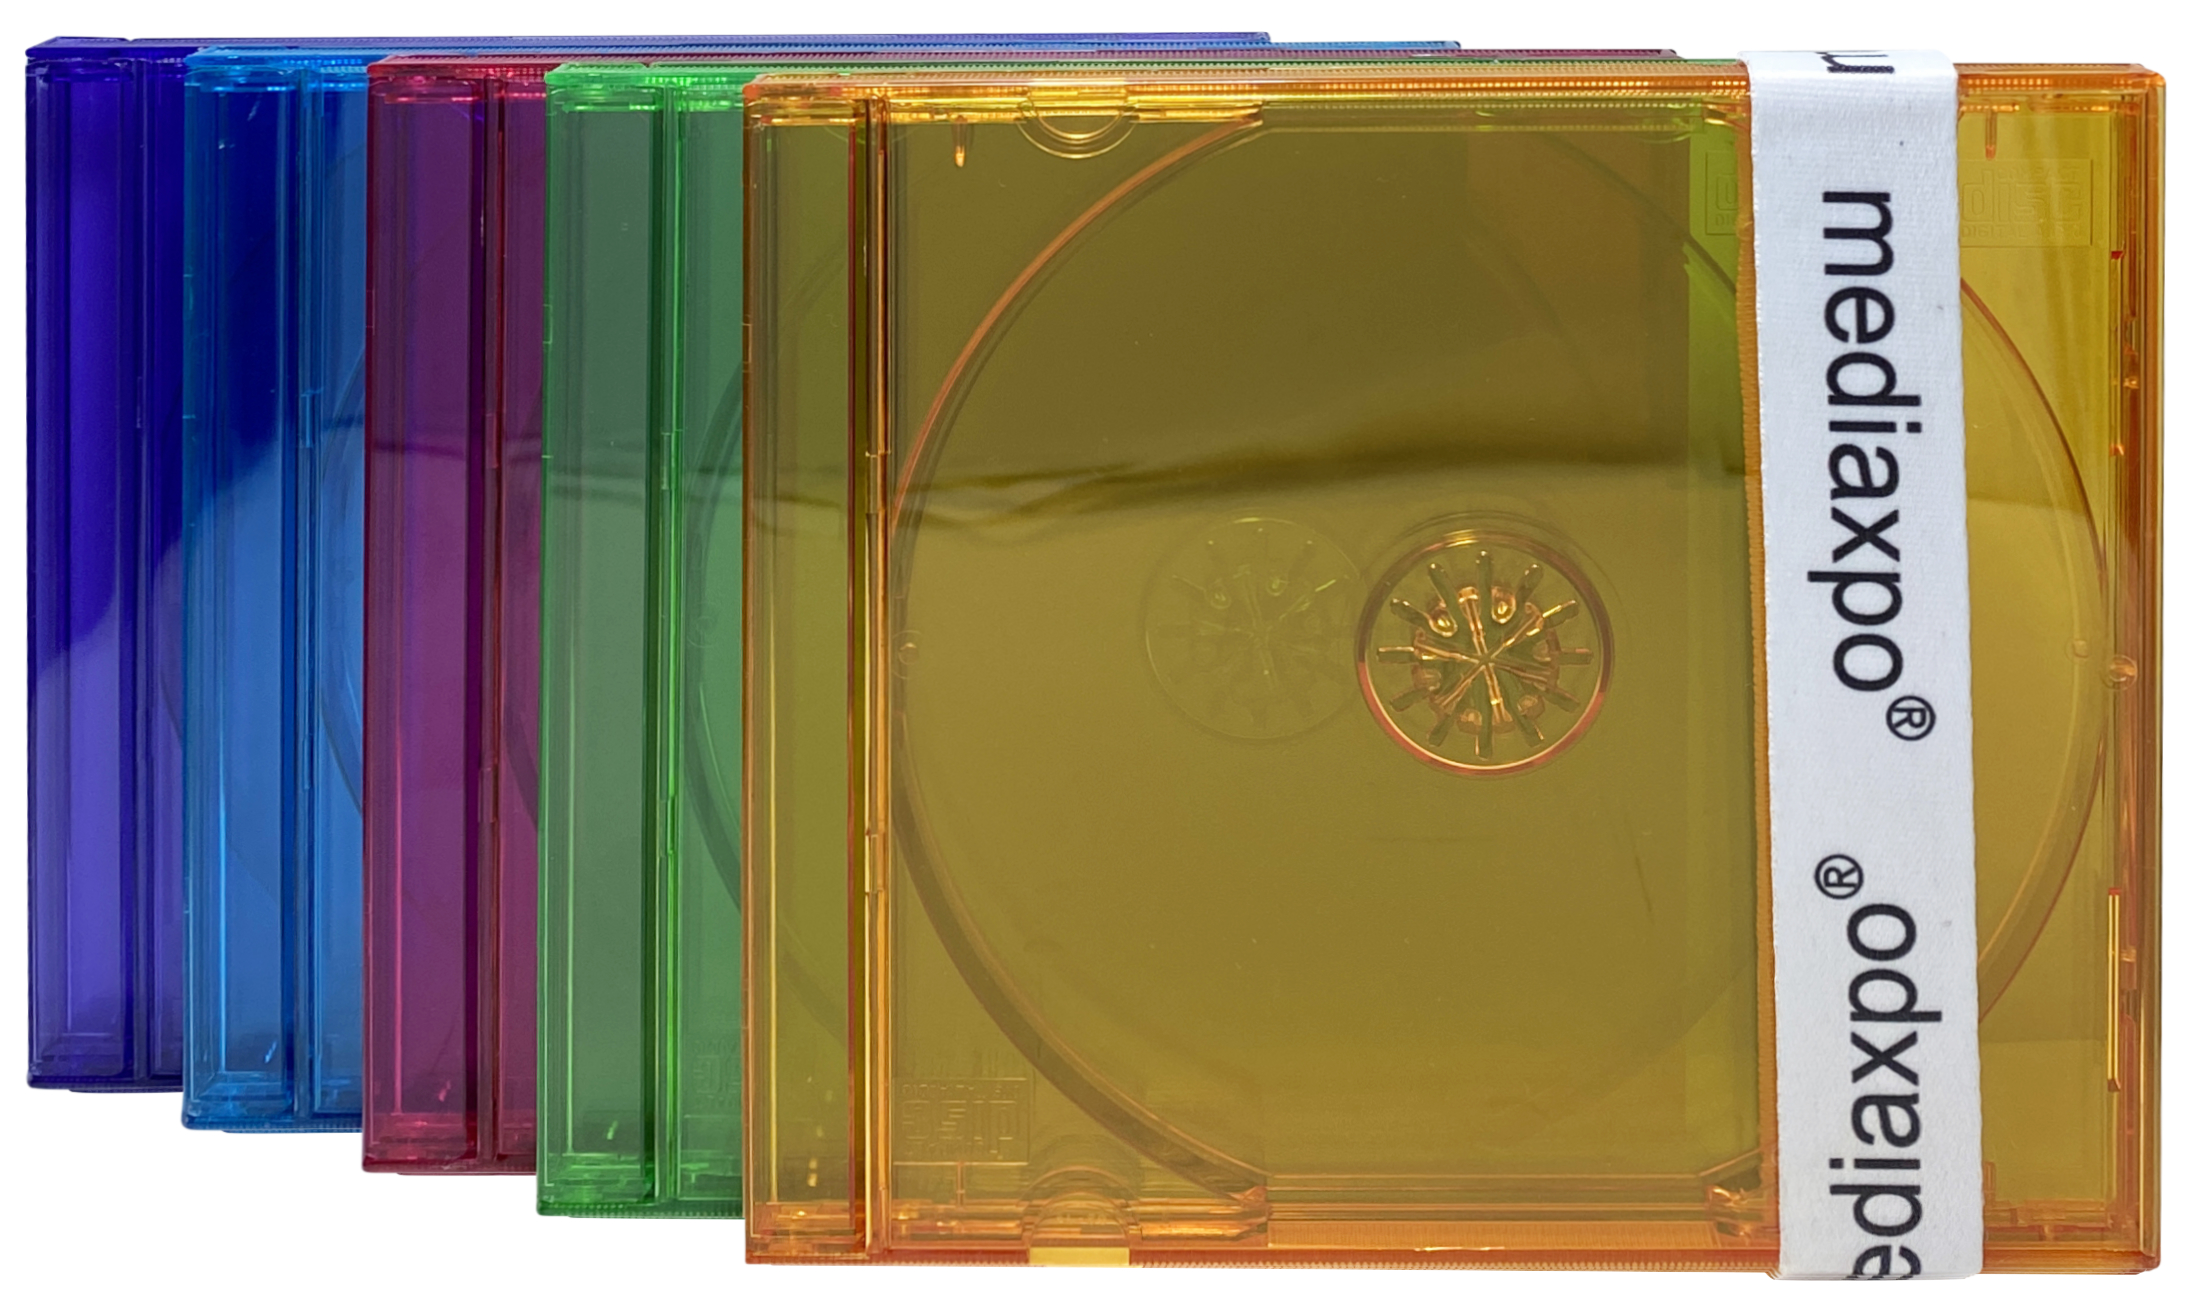 Image of ID 1214259006 100 STANDARD Assorted Clear Color CD Jewel Case